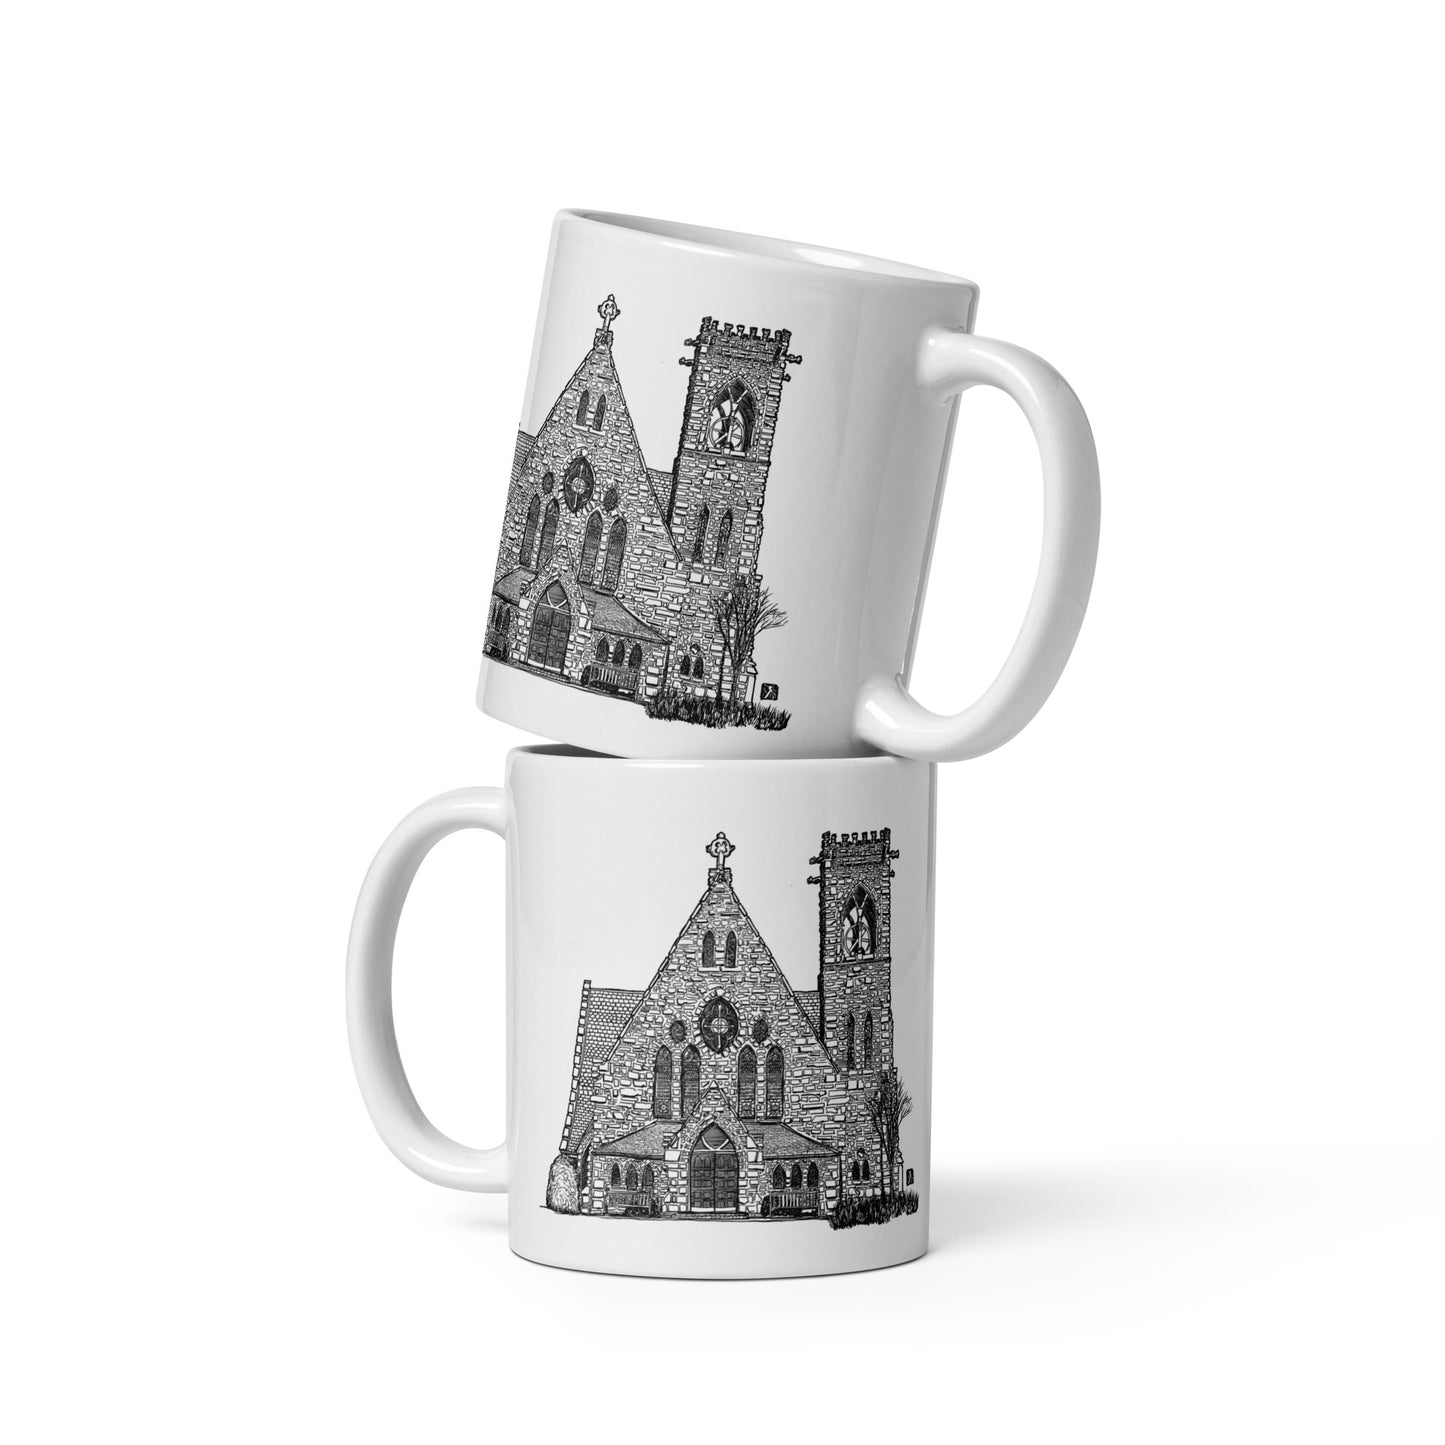 BellavanceInk: 11 Oz White Coffee Mug With Pen And Ink Drawing Of The Chapel At the University Of Virginia (Officially Licensed)